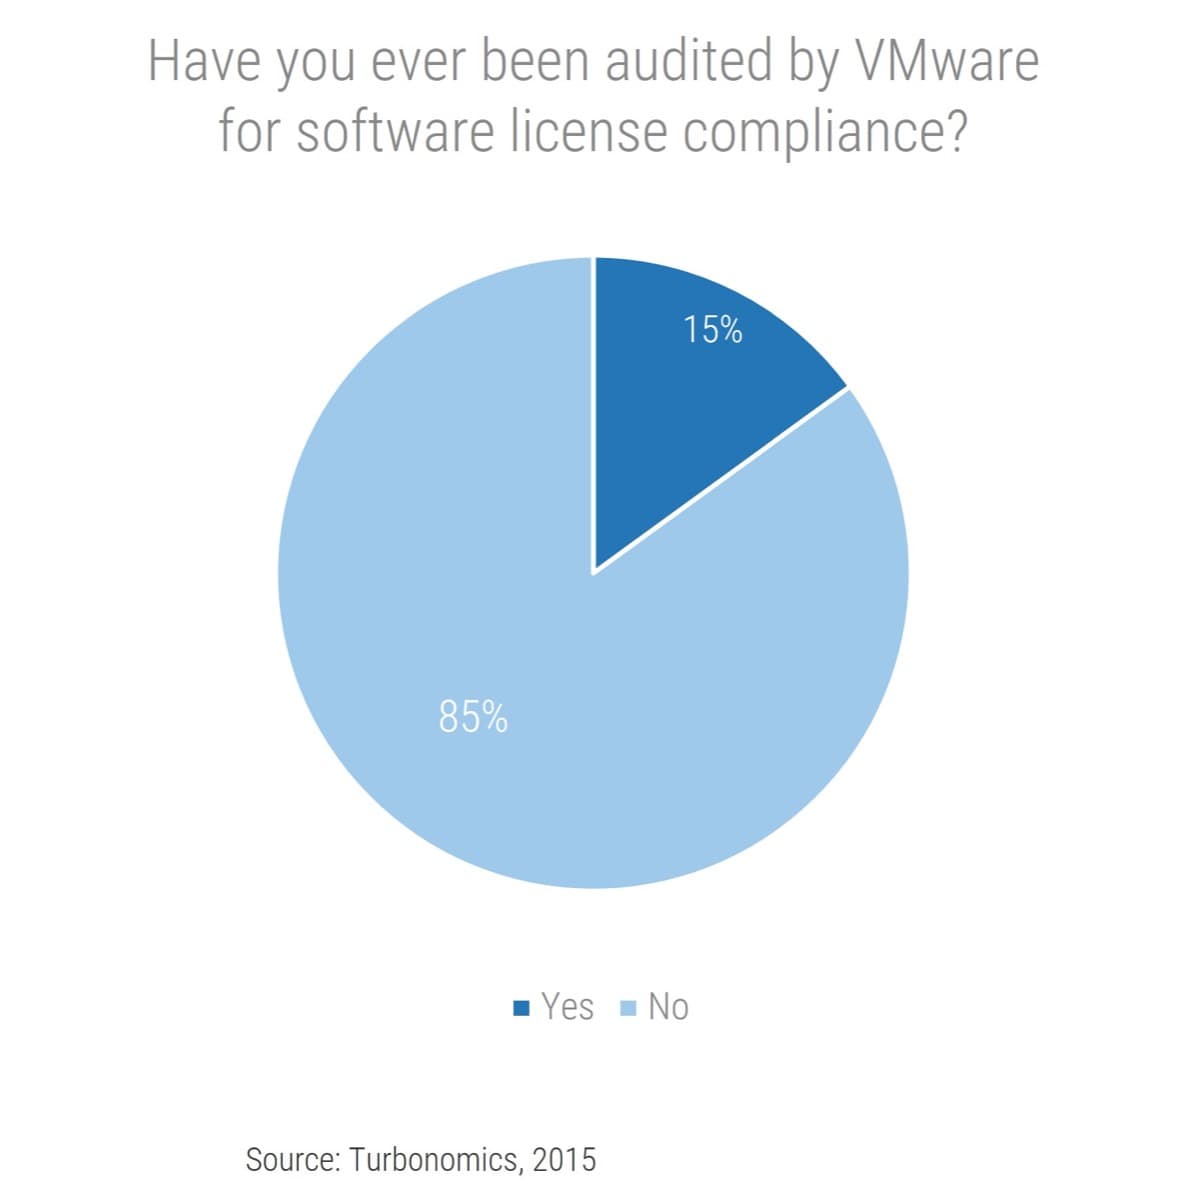 The image contains a pie chart to demonstrate that 85% have answered yes to being audited by VMware for software license compliance.